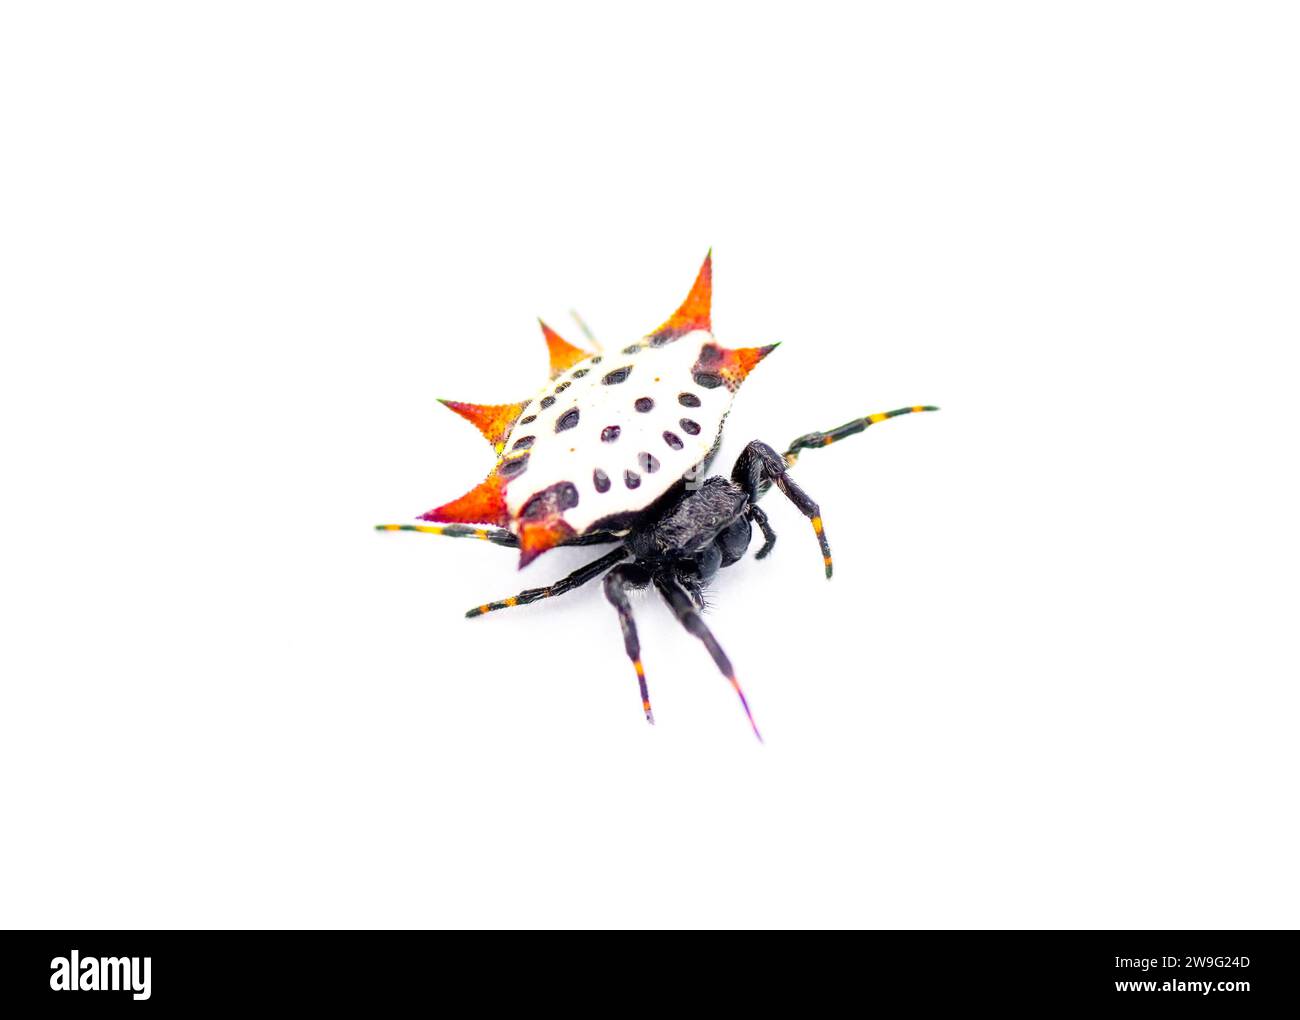 Spiny backed orb weaver spider - Gasteracantha cancriformis - aka crab or kite spider crawling right view isolated on white background Stock Photo